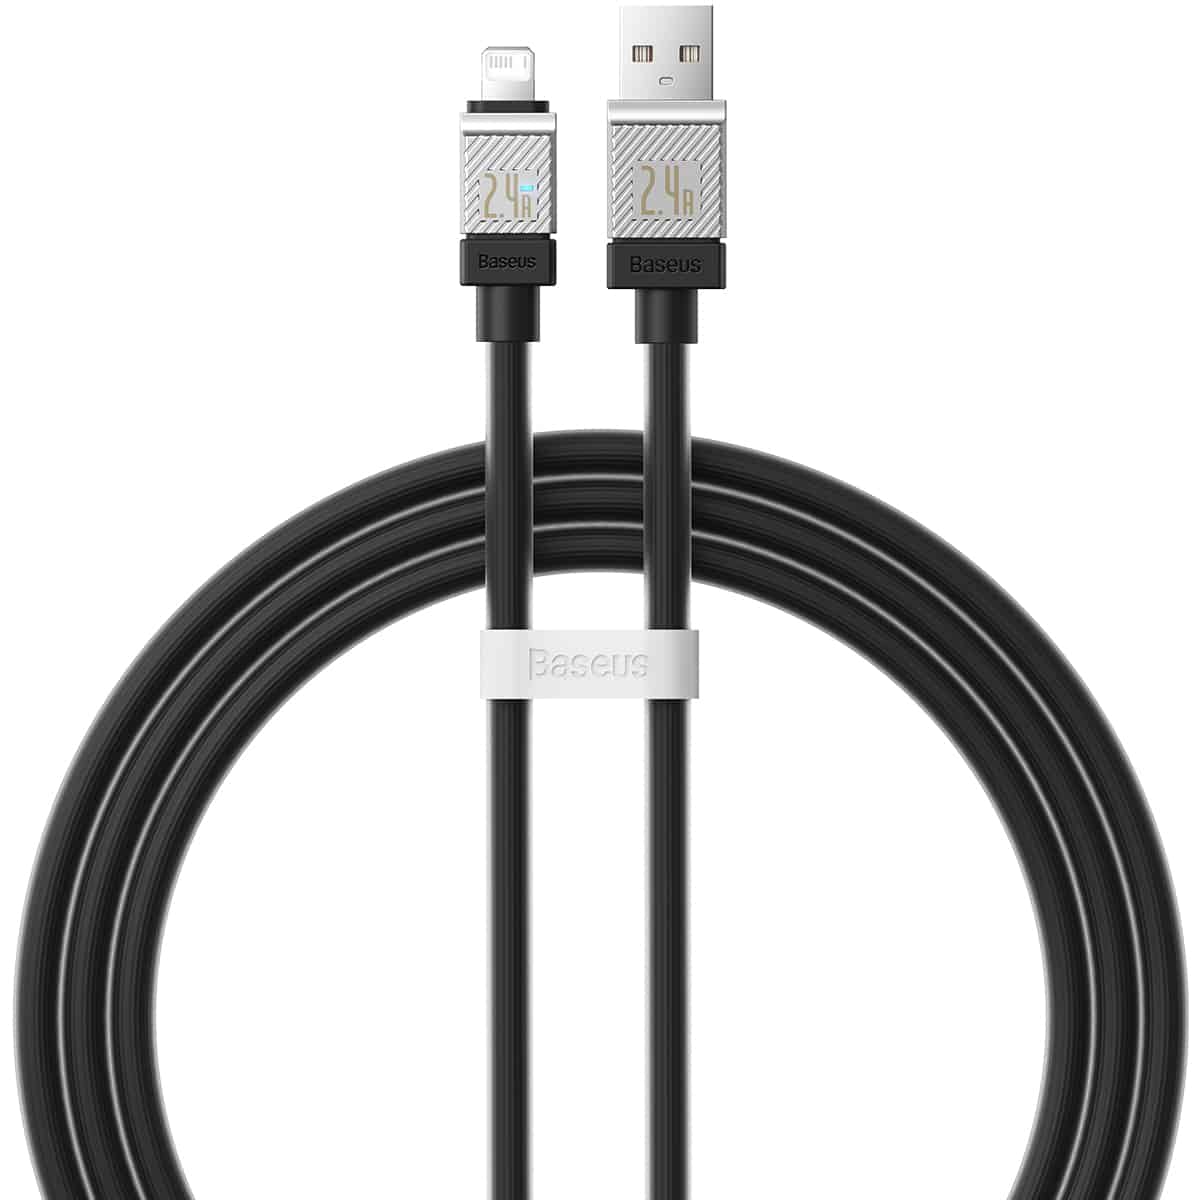 Baseus CoolPlay Series Fast Charging Cable USB to iPhone 2.4A